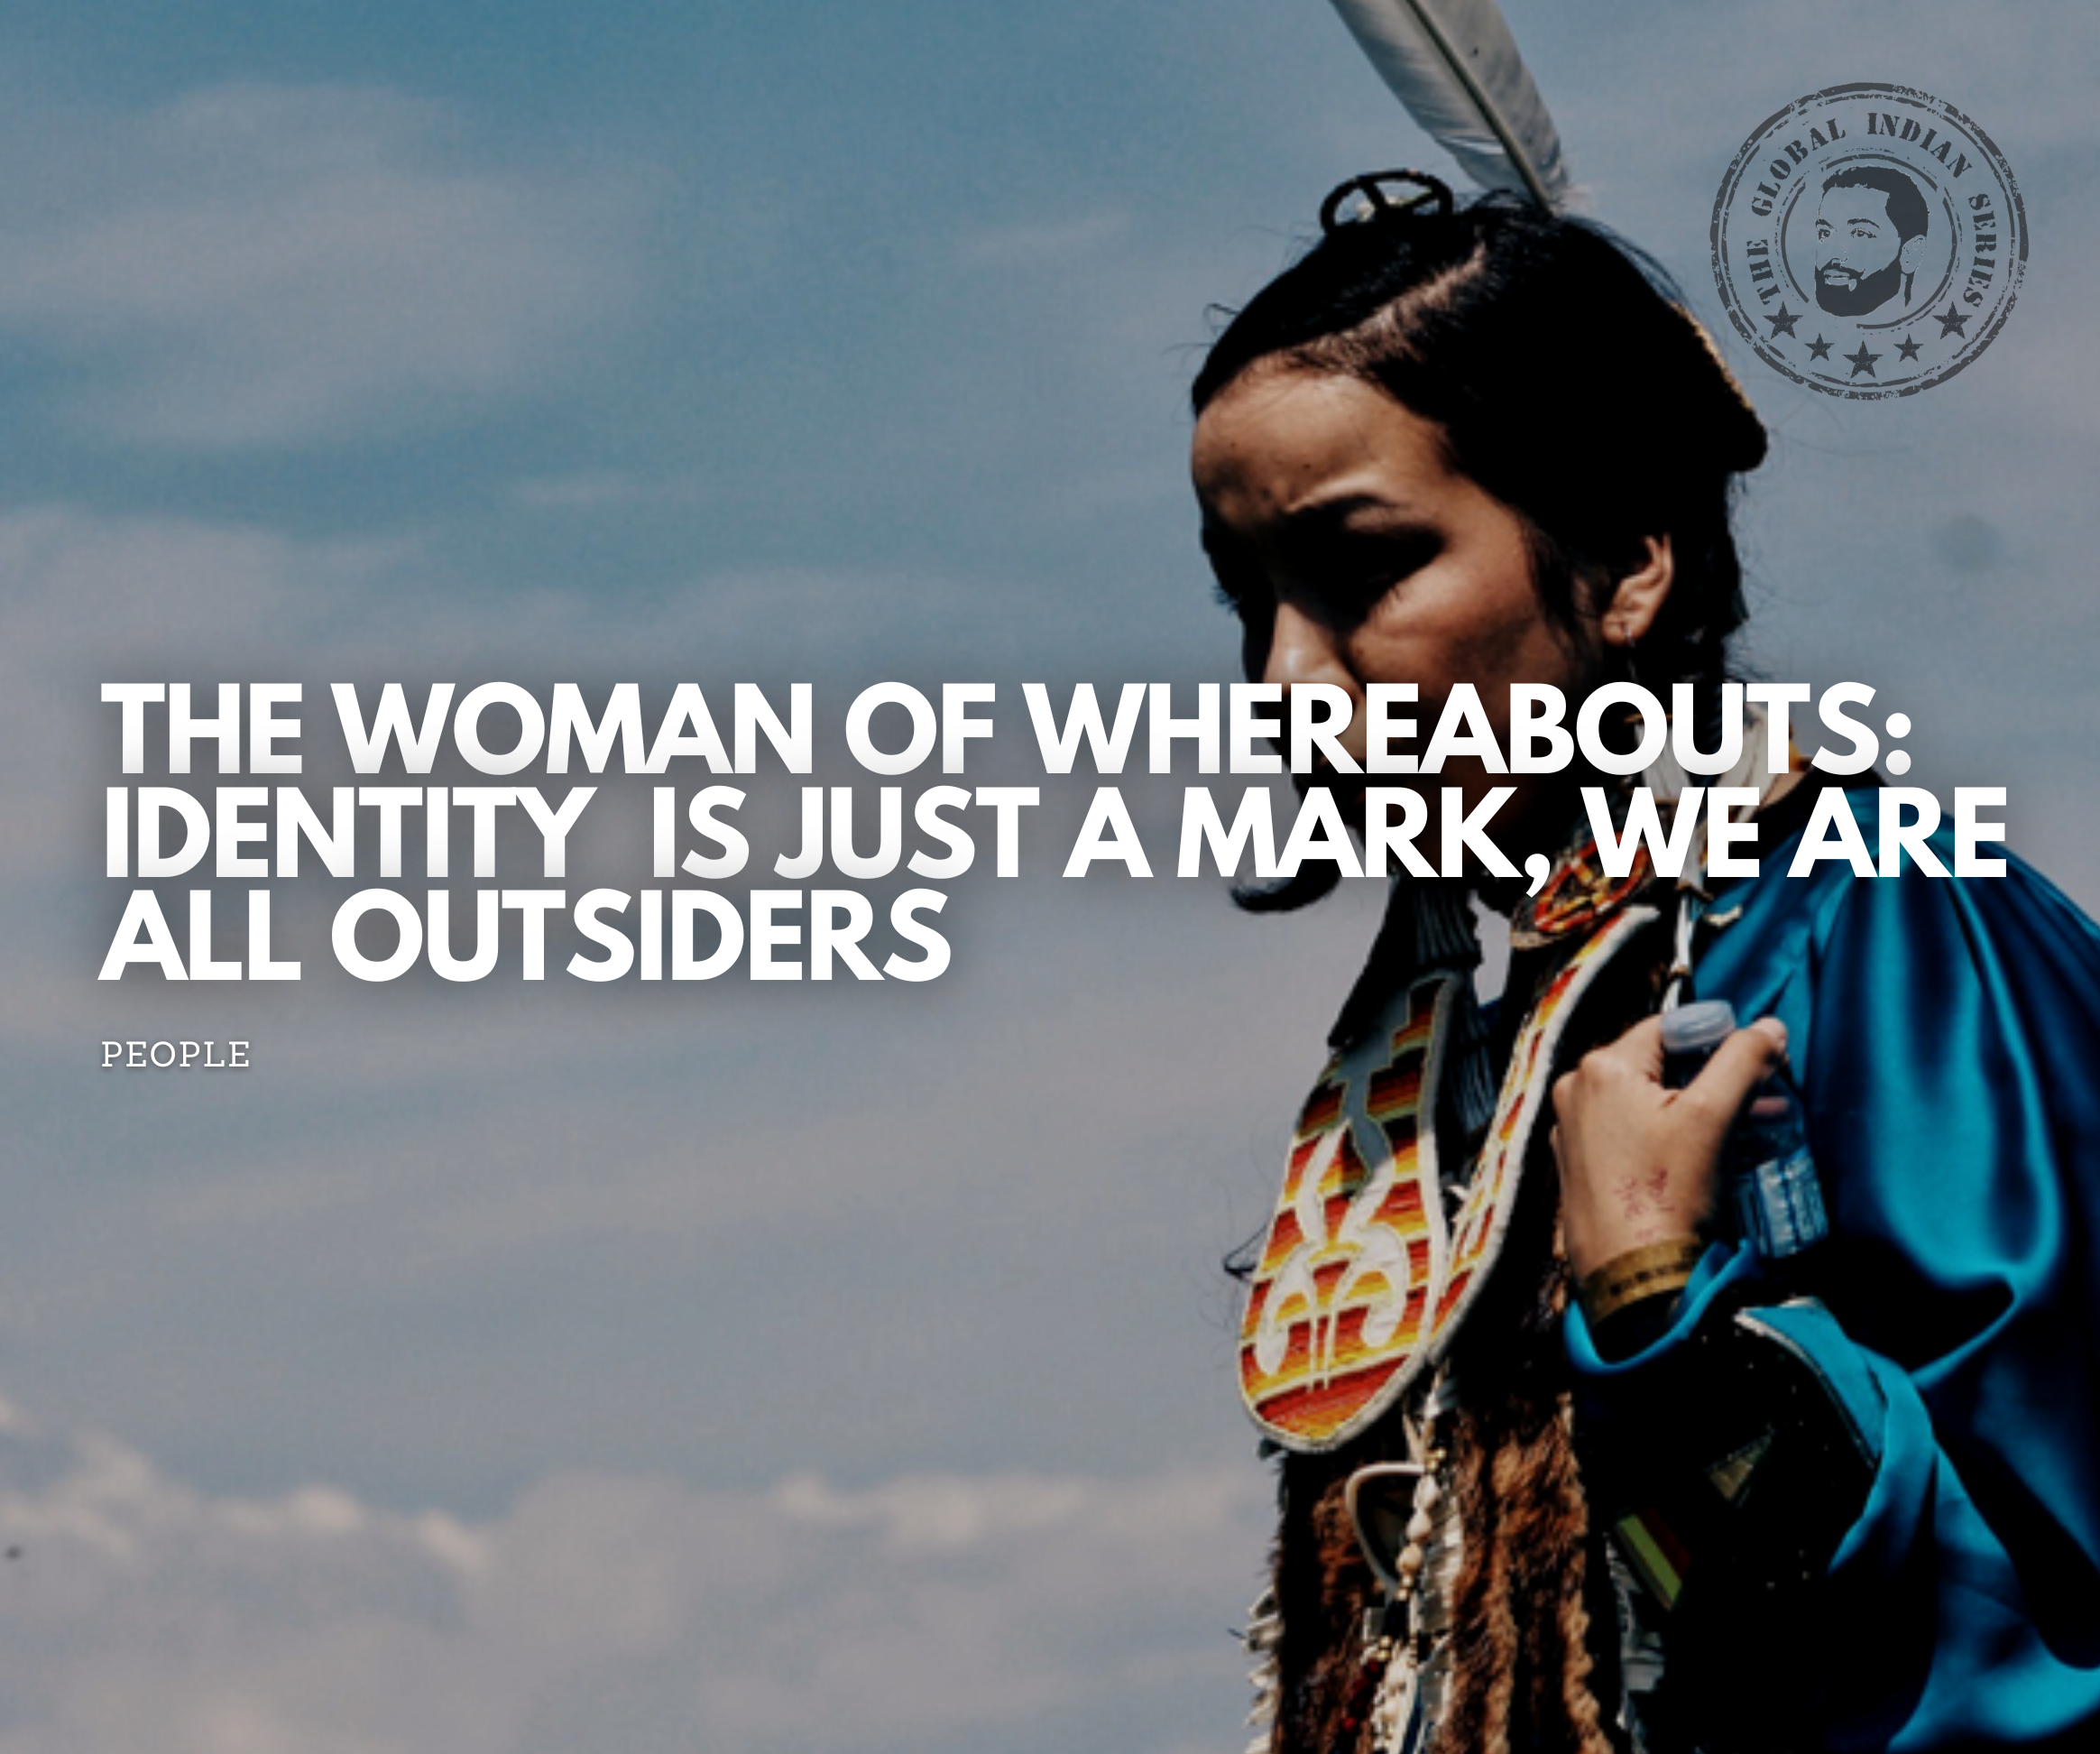 The Woman Of Whereabouts: Identity Is Just A Marker, We Are All Outsiders, challenges the meaning of identity and belongingness.